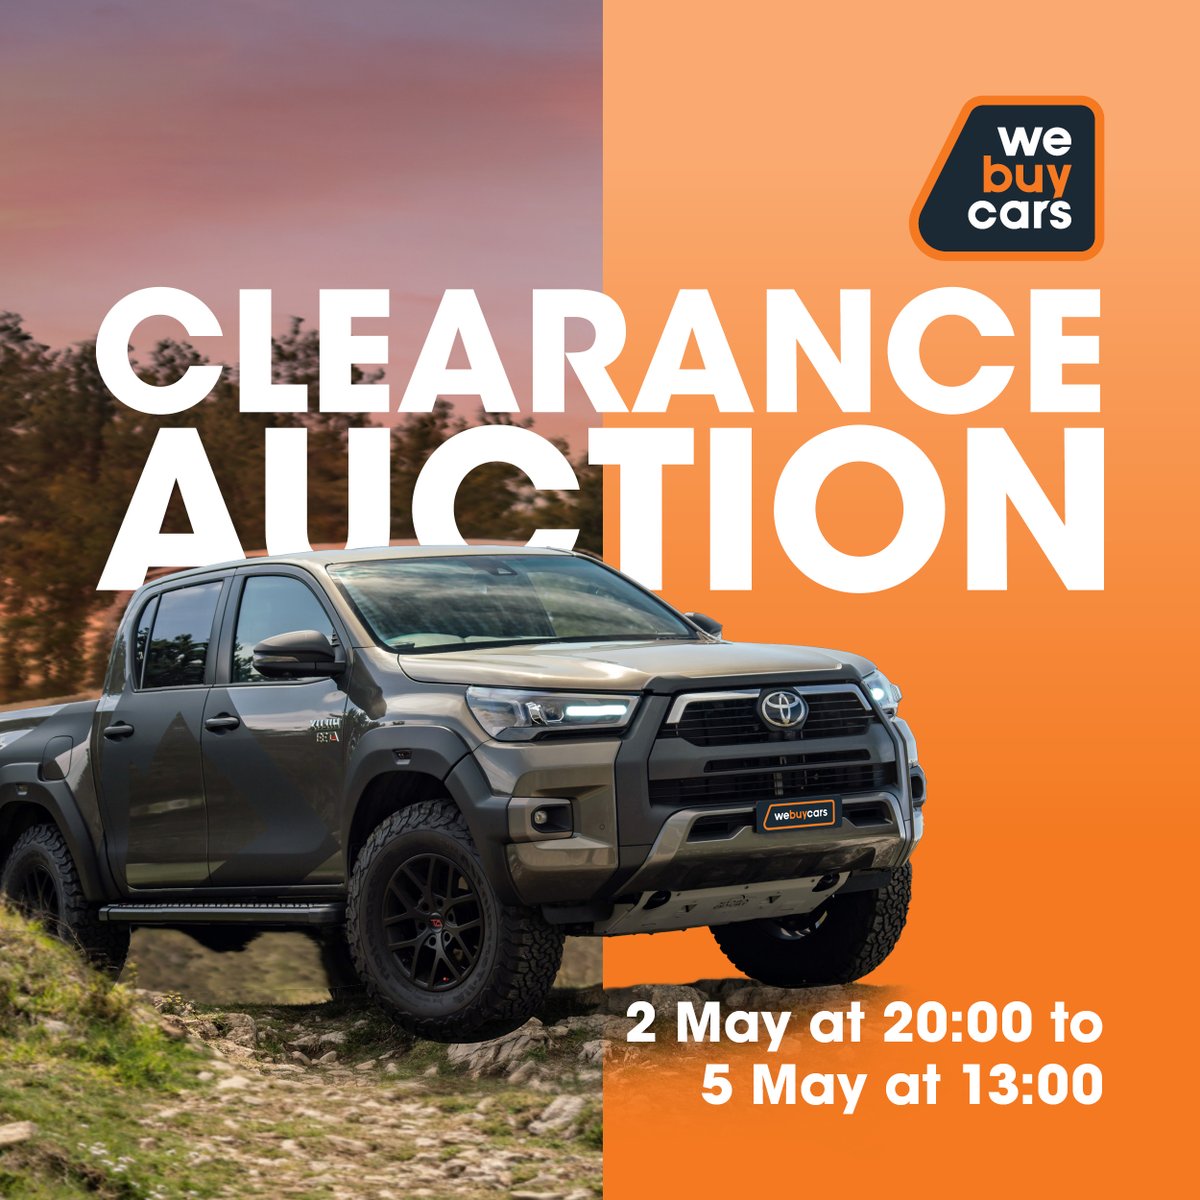 Now is your chance 🙌 Bid in the #WeBuyCars Clearance Auction for the best deals! #carsforsale #preownedcars #usedcars #usedcarsforsale #carshopping #carfinance #autosales #carsales #carlifestyle #toyota